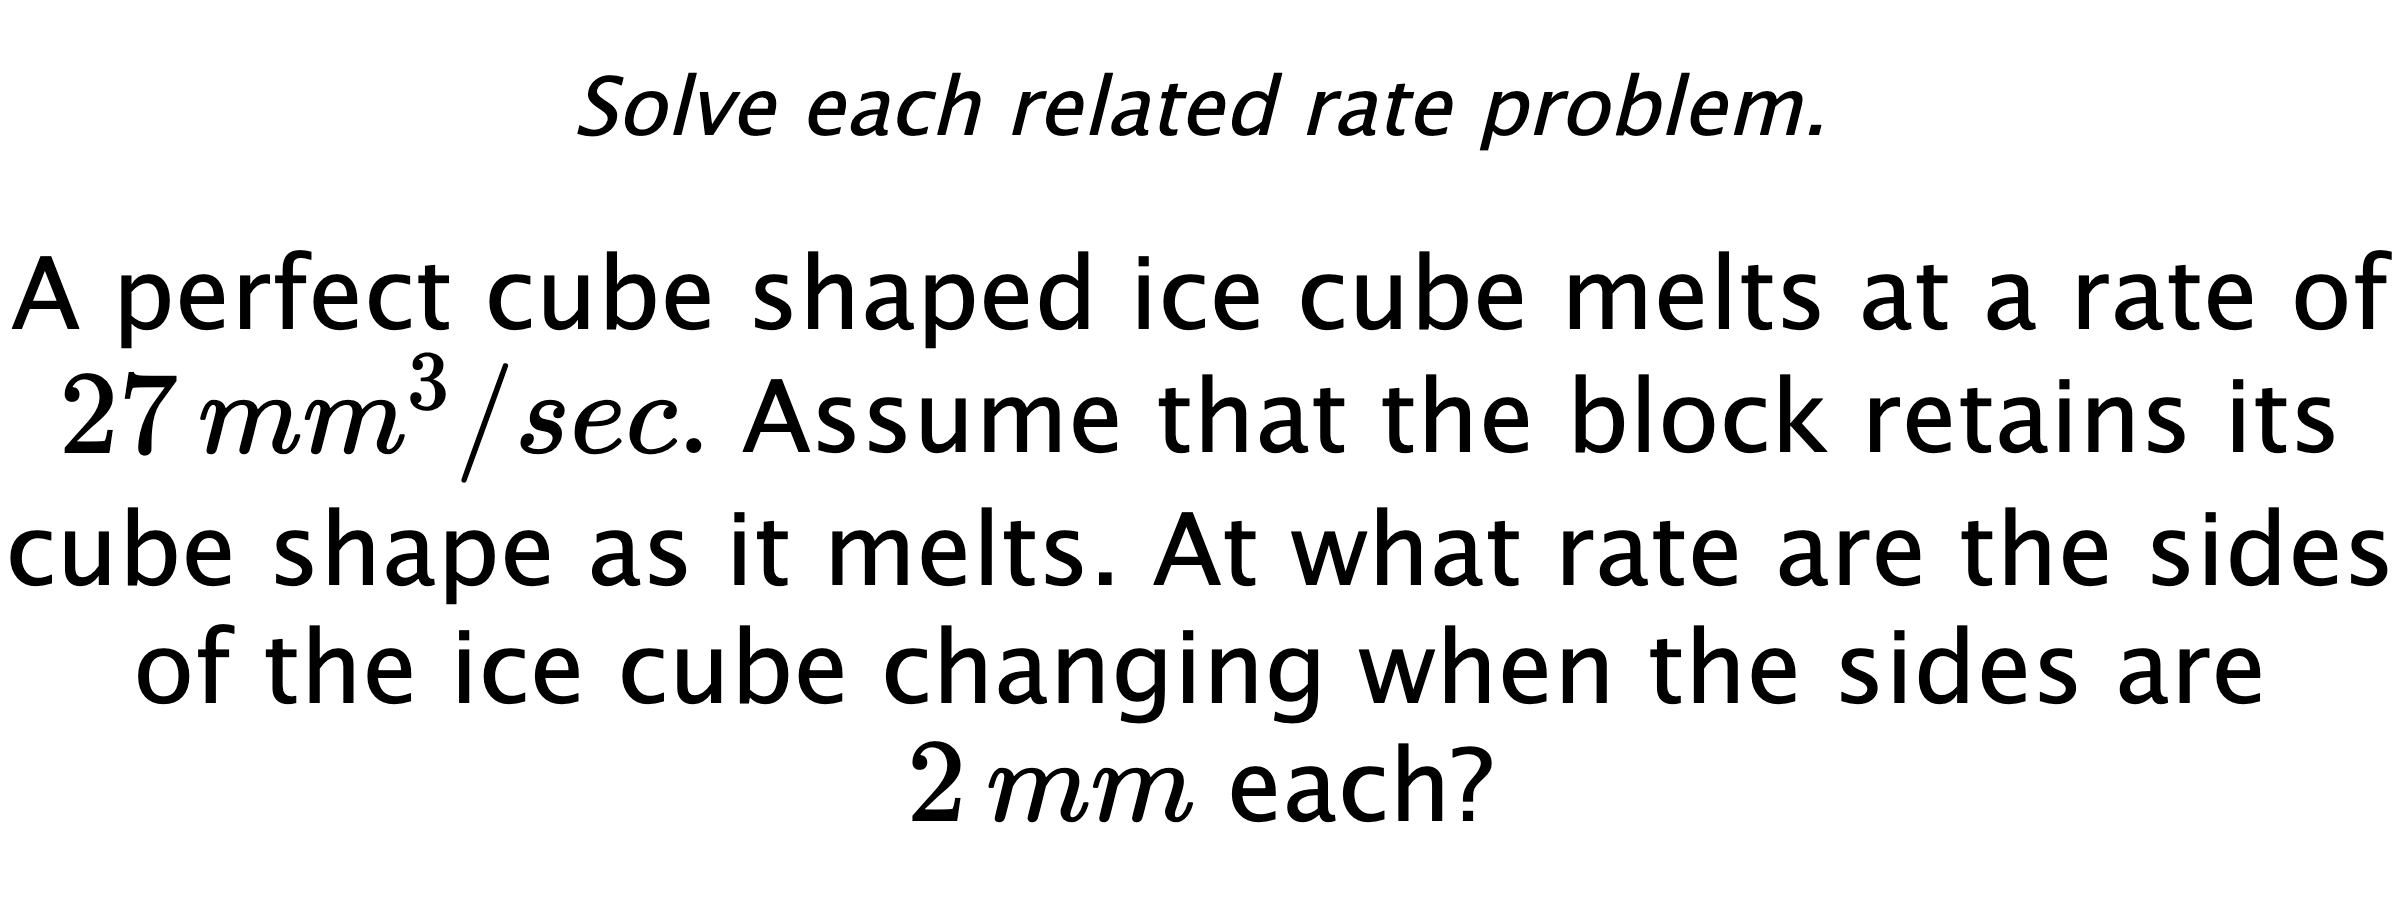 Solve each related rate problem. A perfect cube shaped ice cube melts at a rate of $27 \,mm^{3}/sec.$ Assume that the block retains its cube shape as it melts. At what rate are the sides of the ice cube changing when the sides are $2\,mm$ each?